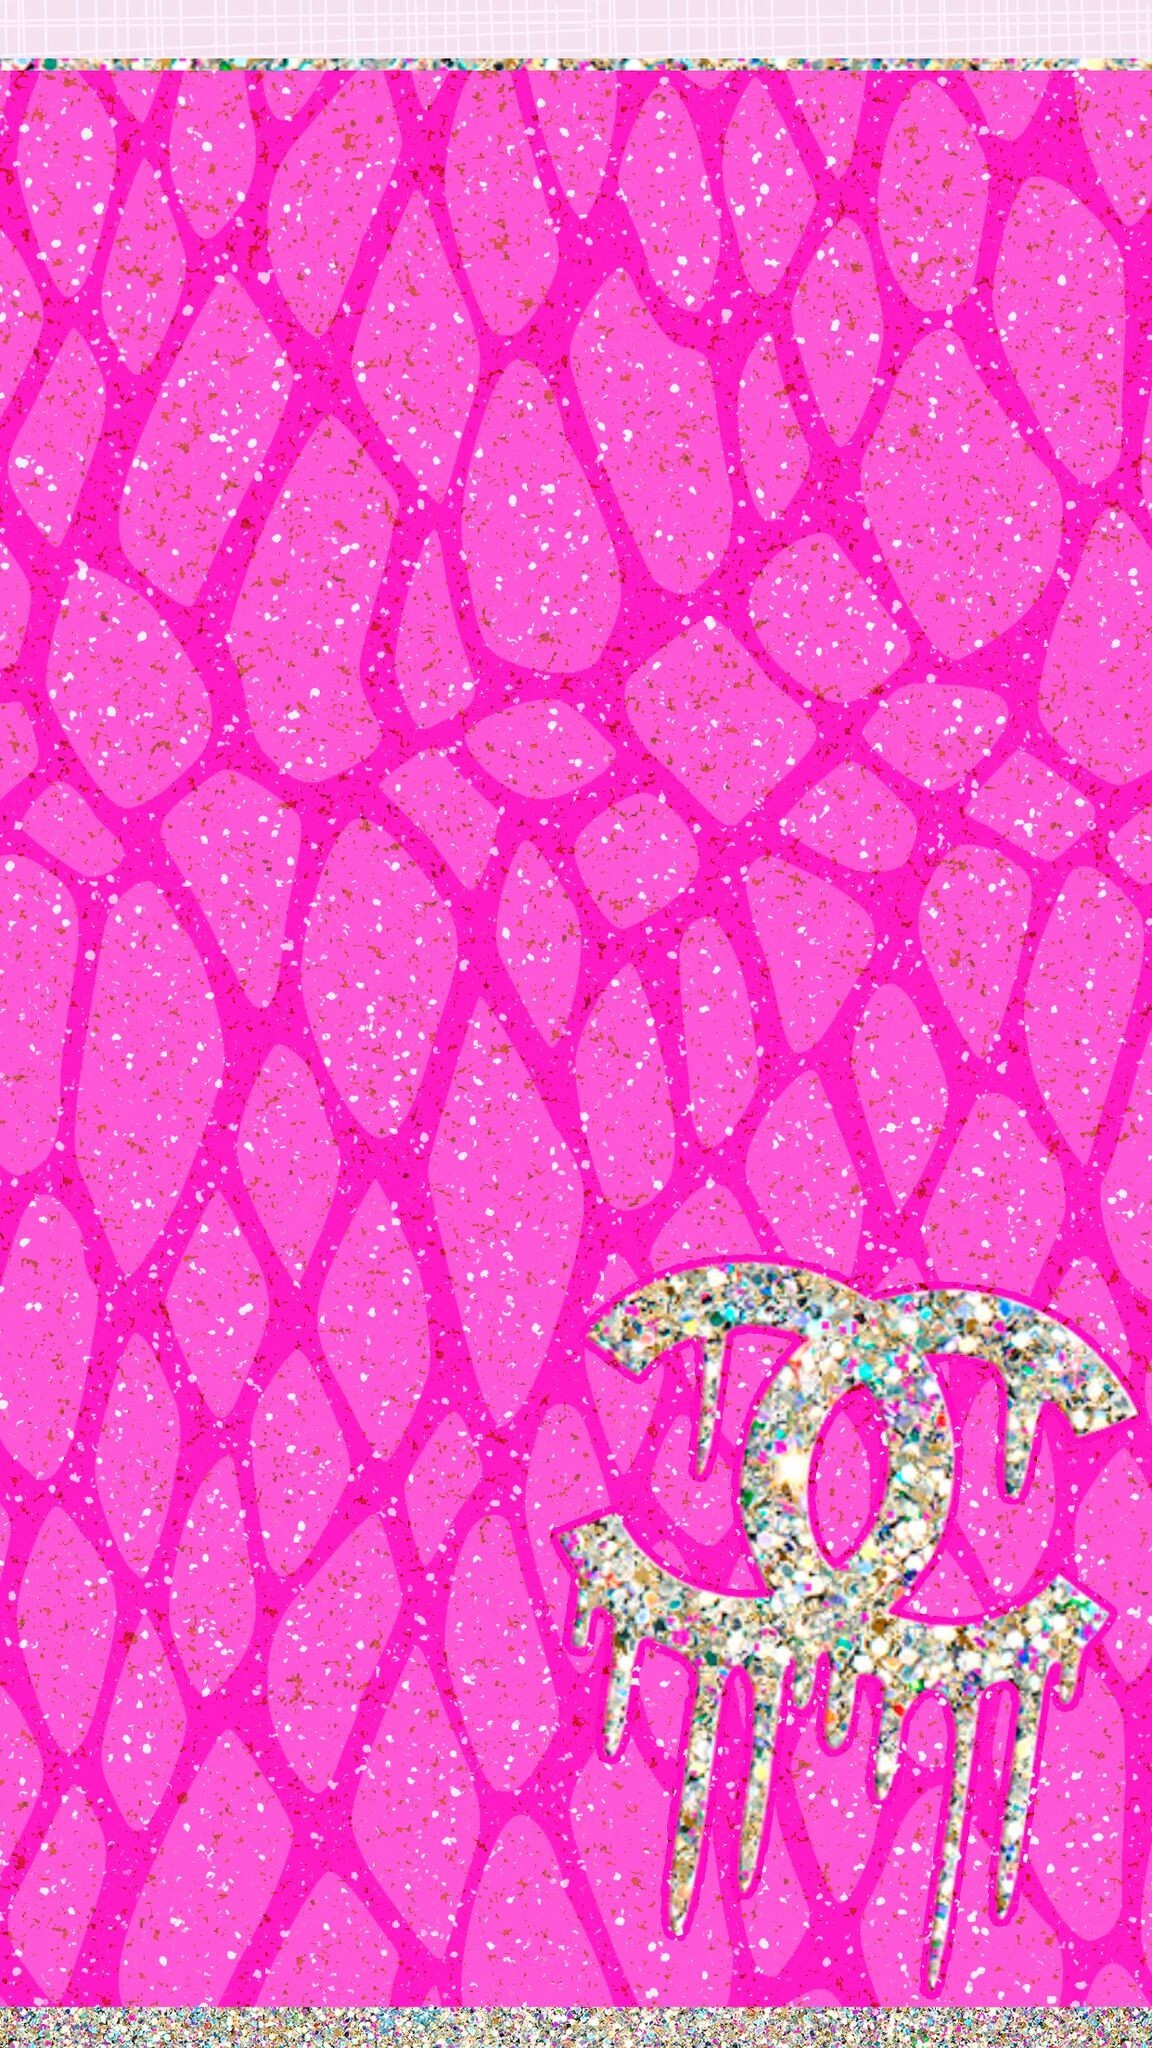 Pink Chanel Wallpaper 54 Images